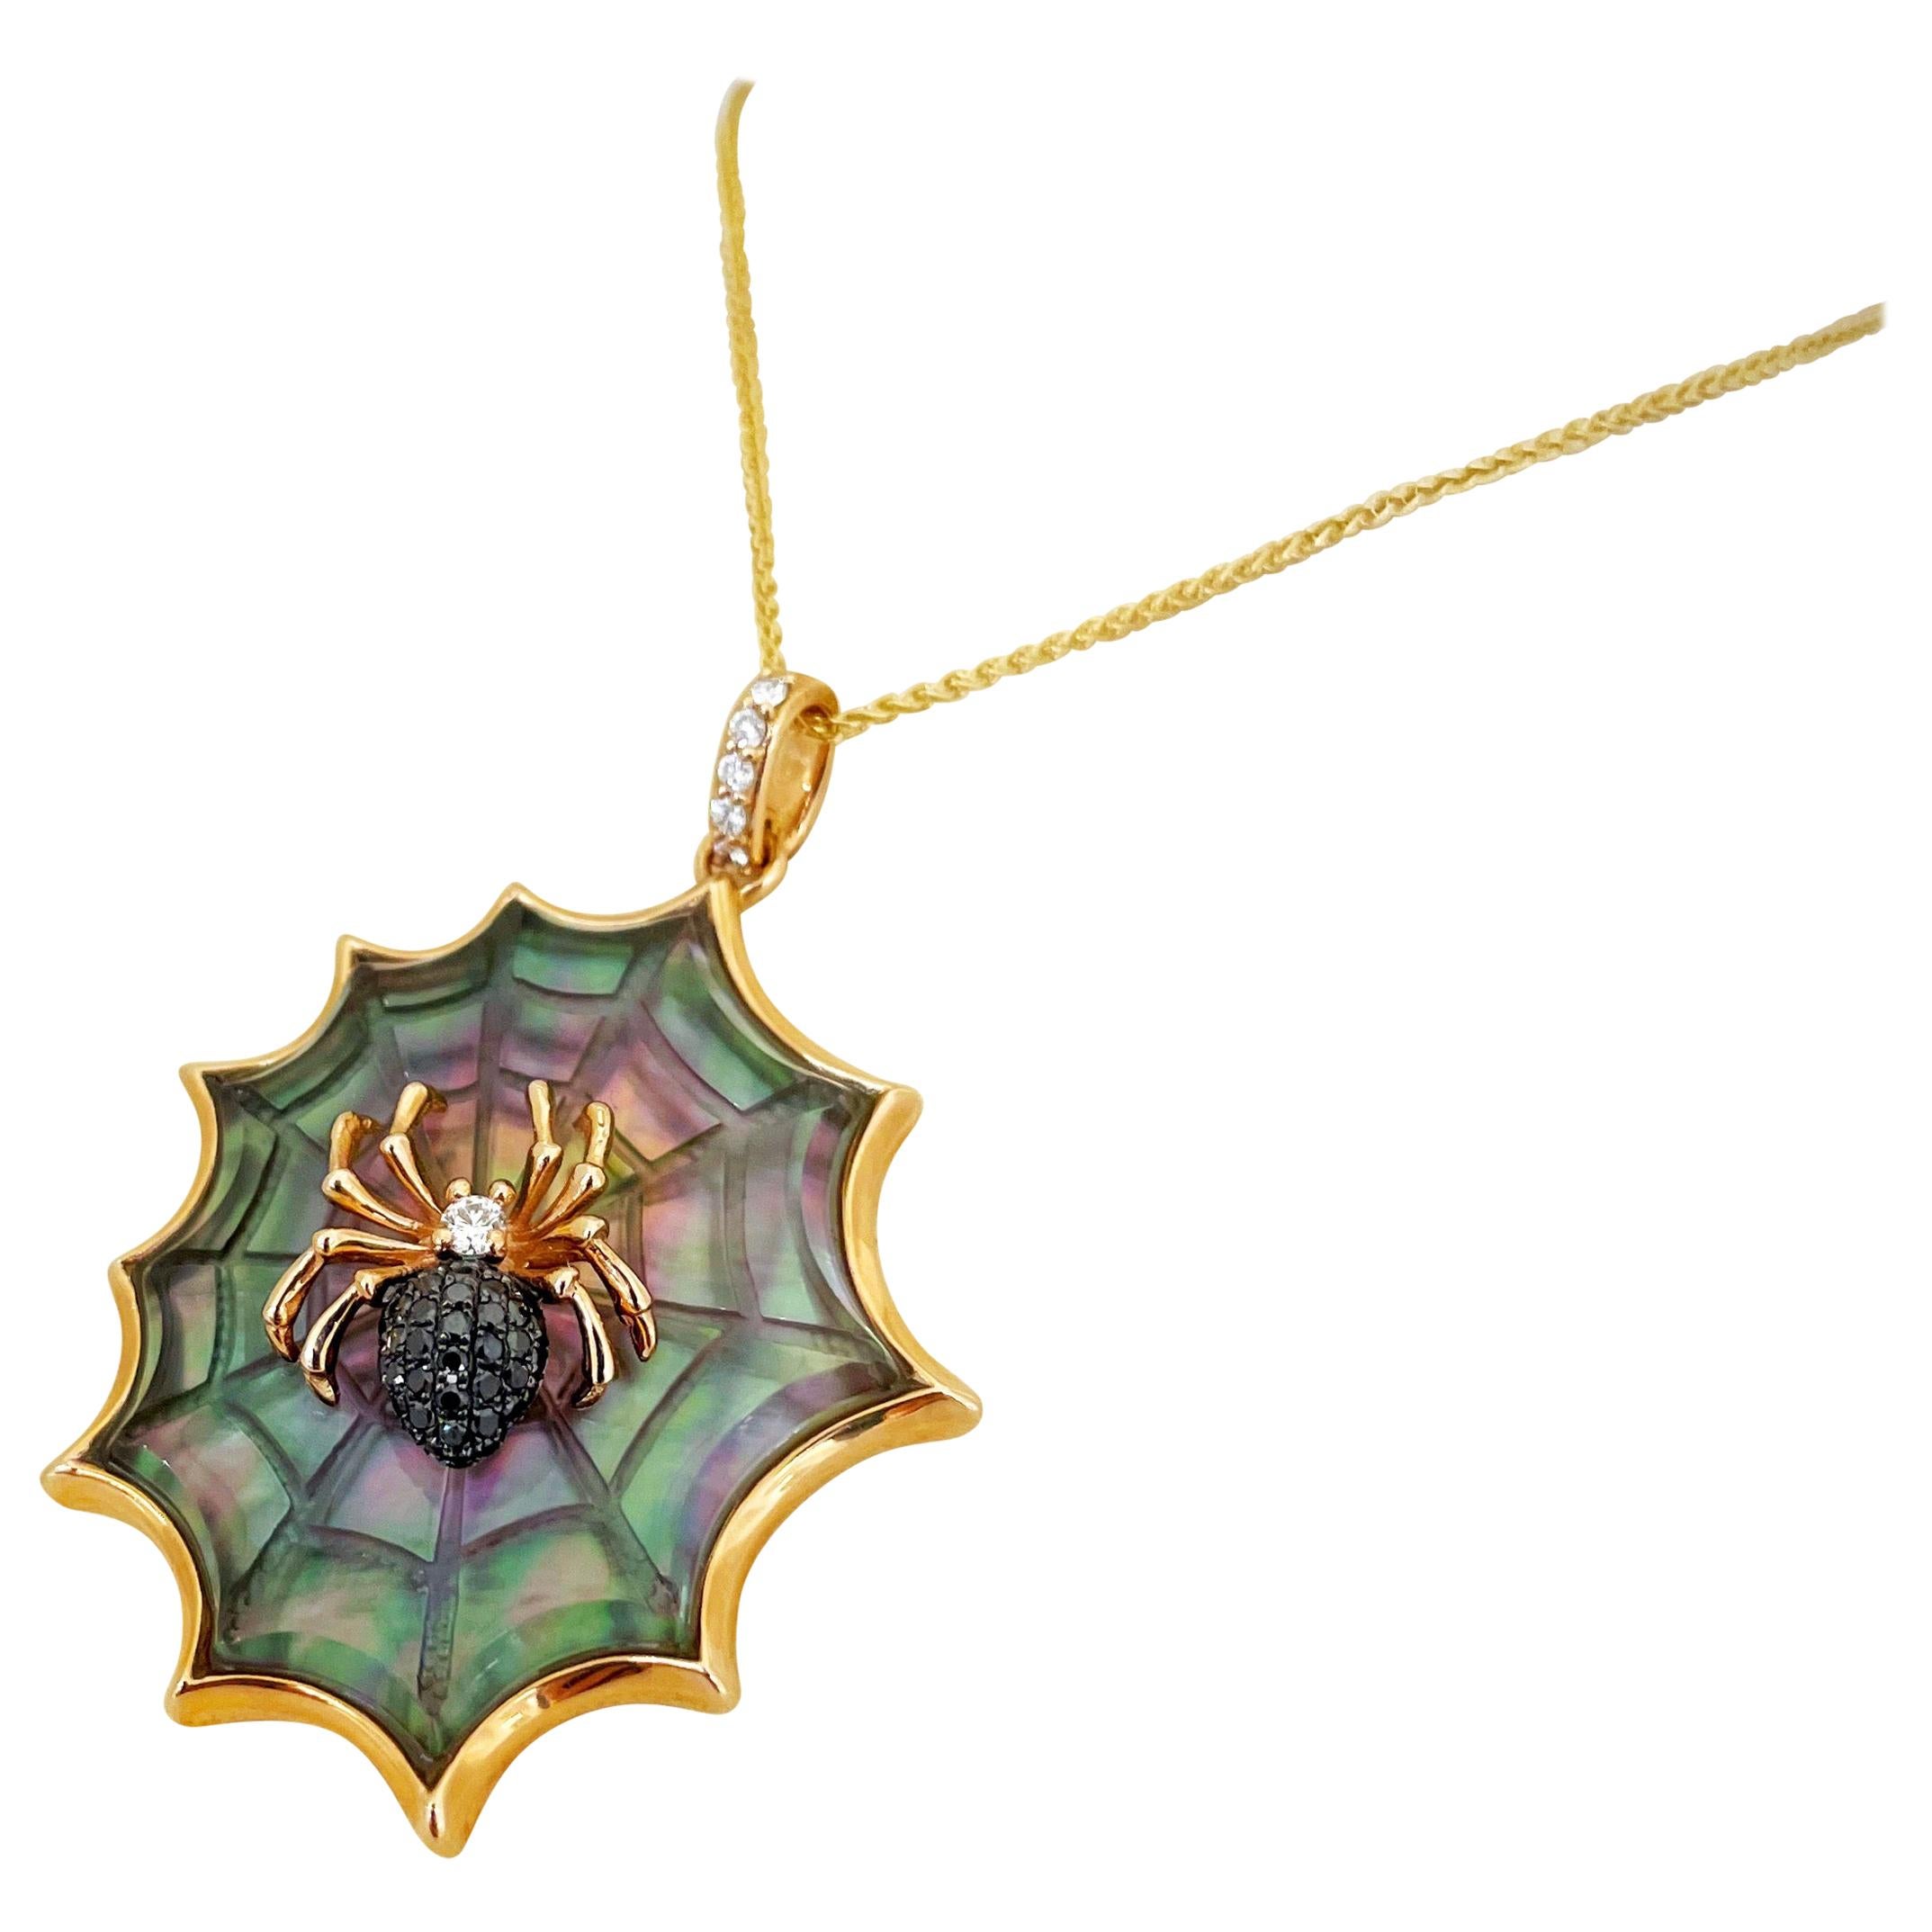 Asch Grossbardt 18KT RG Spider Web Pendant with Black Diamond & Mother of Pearl For Sale